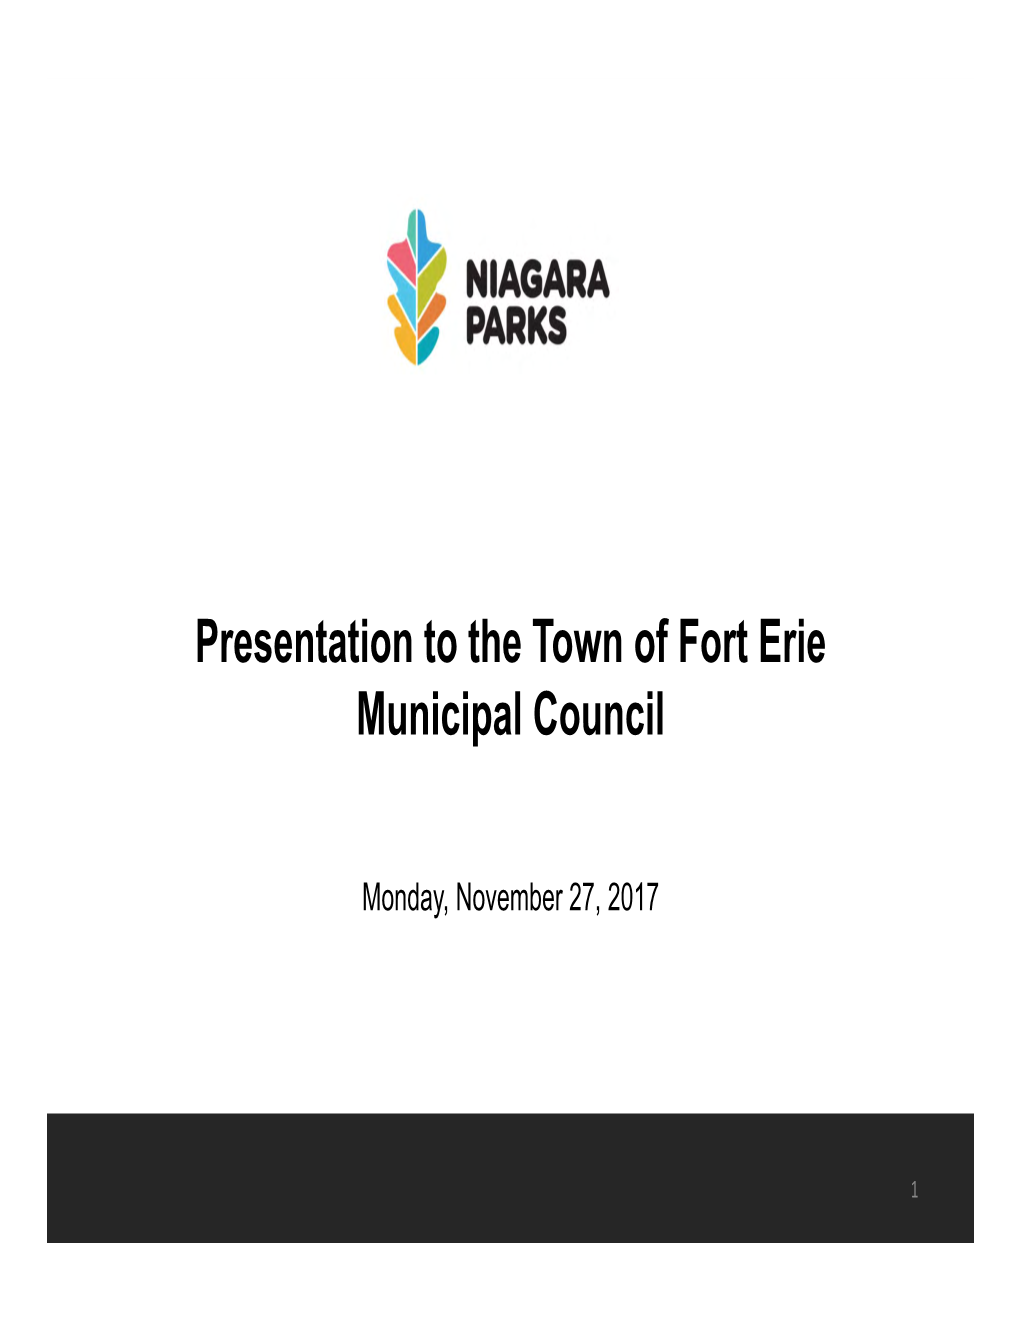 Presentation to the Town of Fort Erie Municipal Council